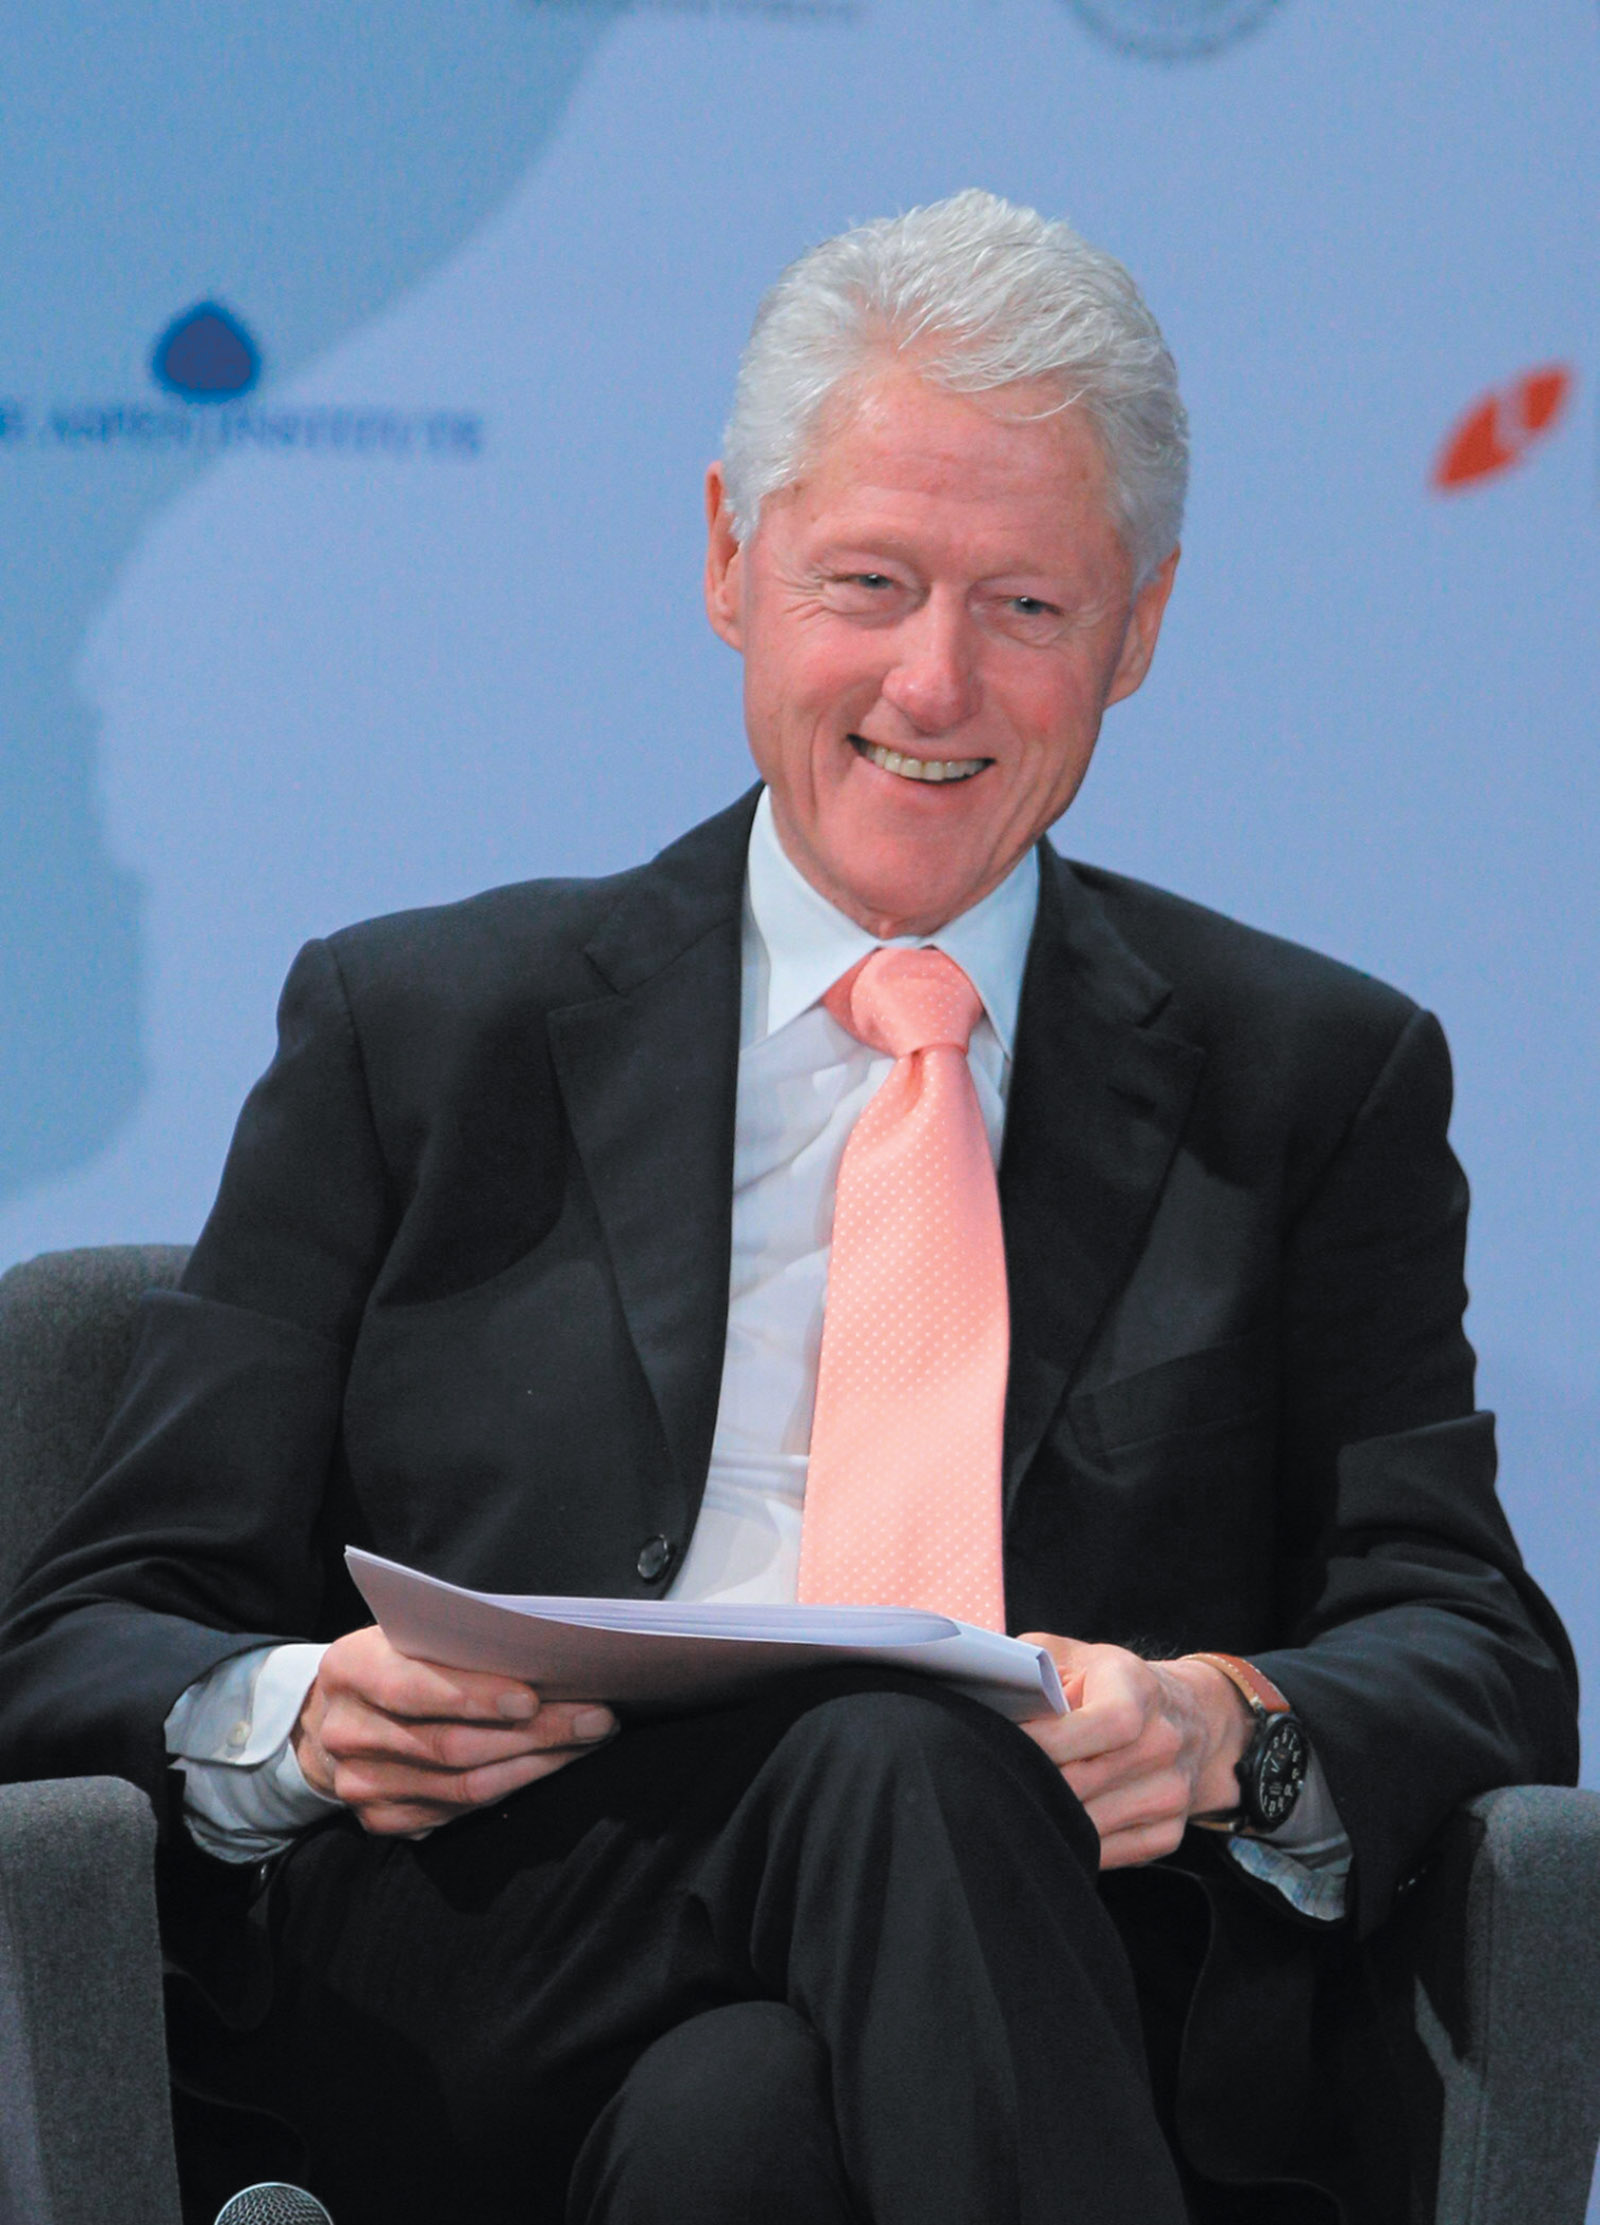 Bill Clinton at a summit on youth and productivity organized by the for-profit Laureate International Universities, Mexico City, February 2015